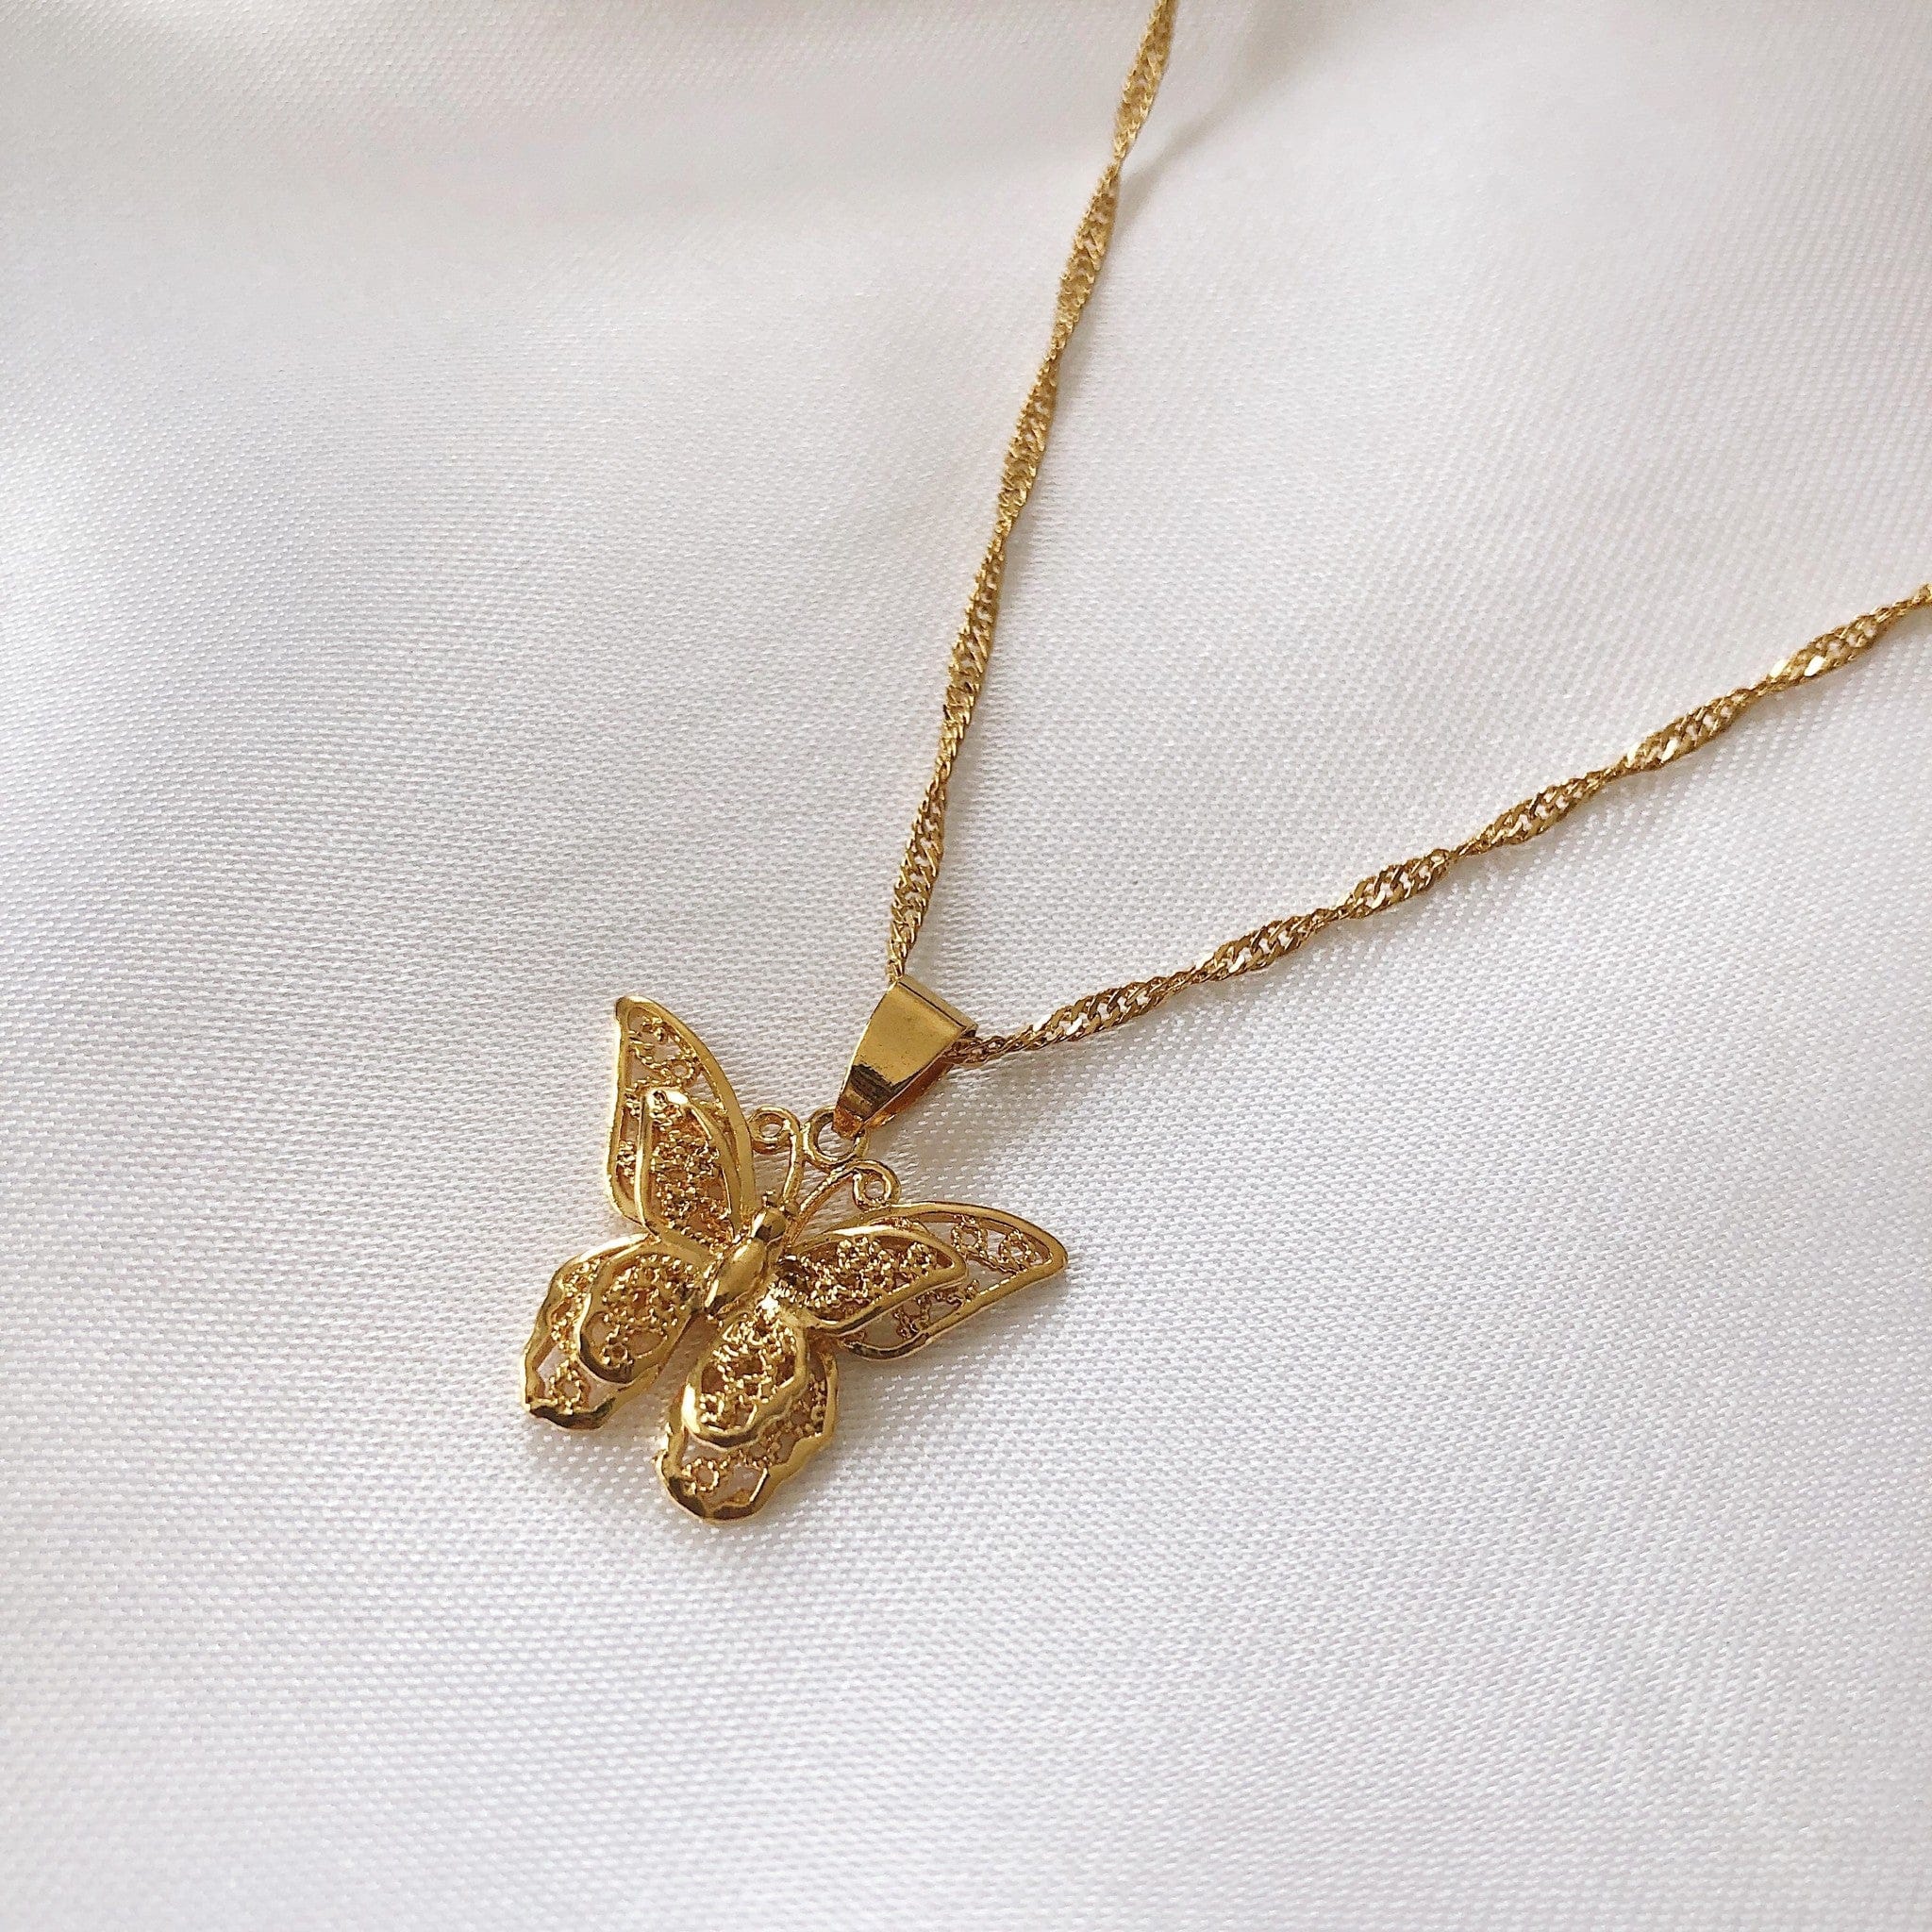 Poise Butterfly Necklace - Pura Jewels